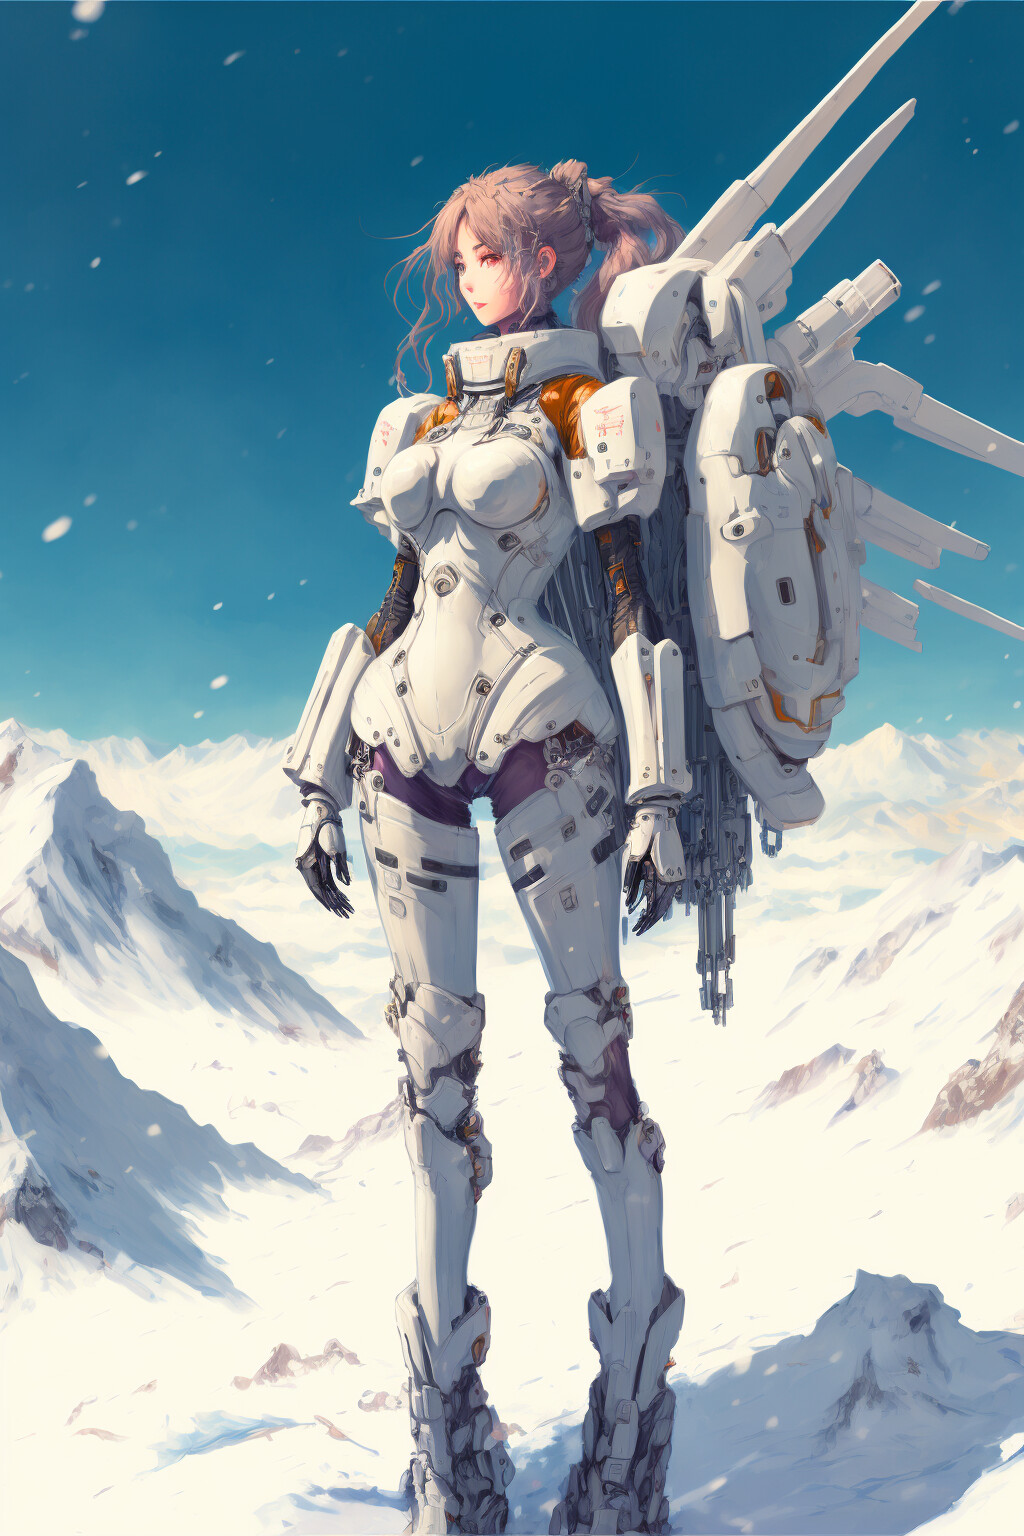 prompthunt: digital anime art, cute mech girl wearing a red mech suit and  blue eyes. wlop, rossdraws, sakimimichan